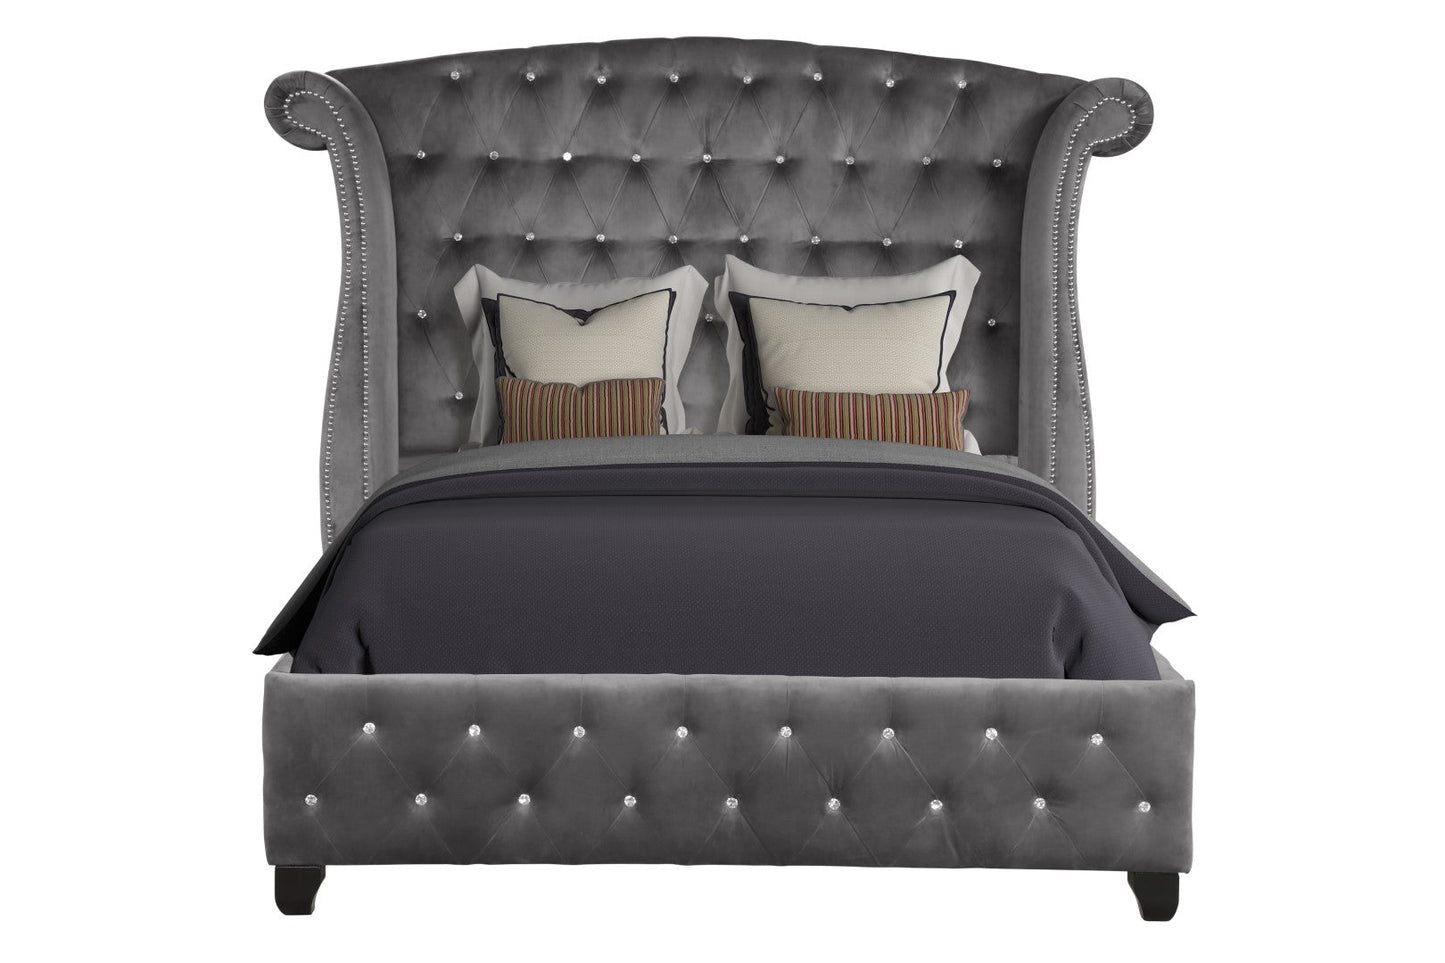 Galaxy Home Sophia Upholstery Queen Size Bed Made with Wood Gray Wood